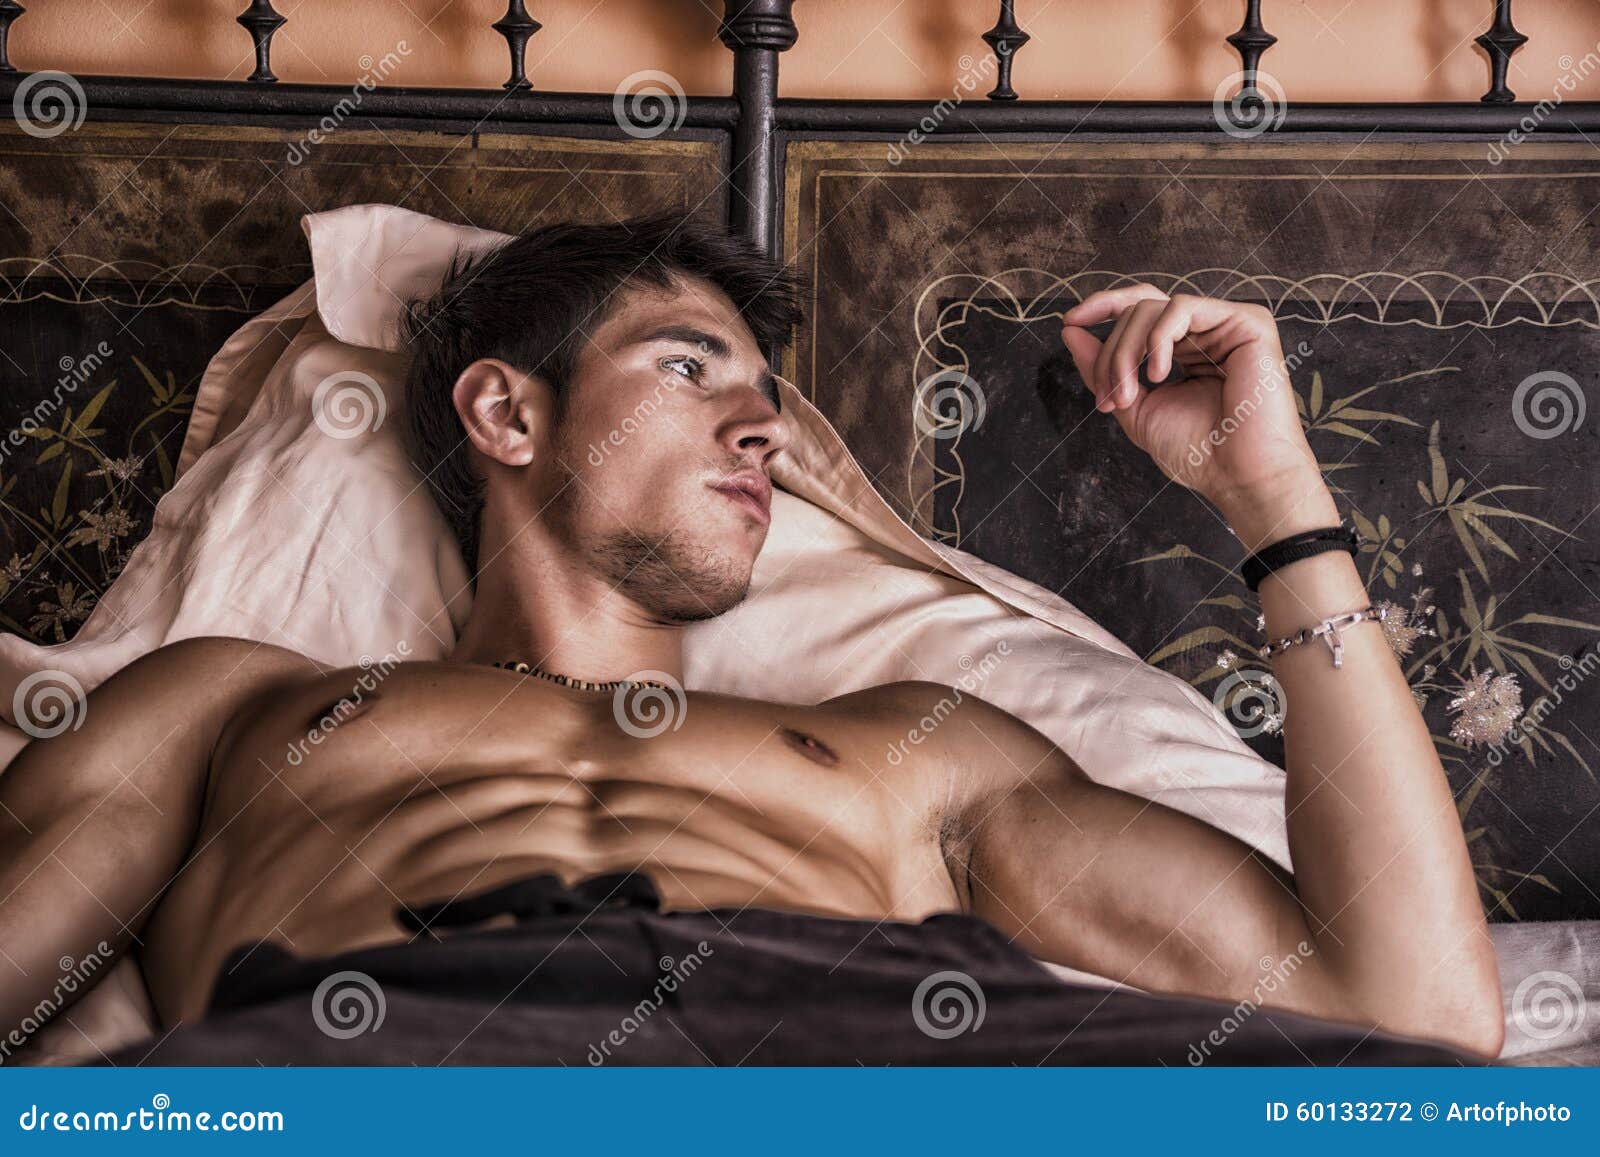 shirtless male model lying alone on his bed